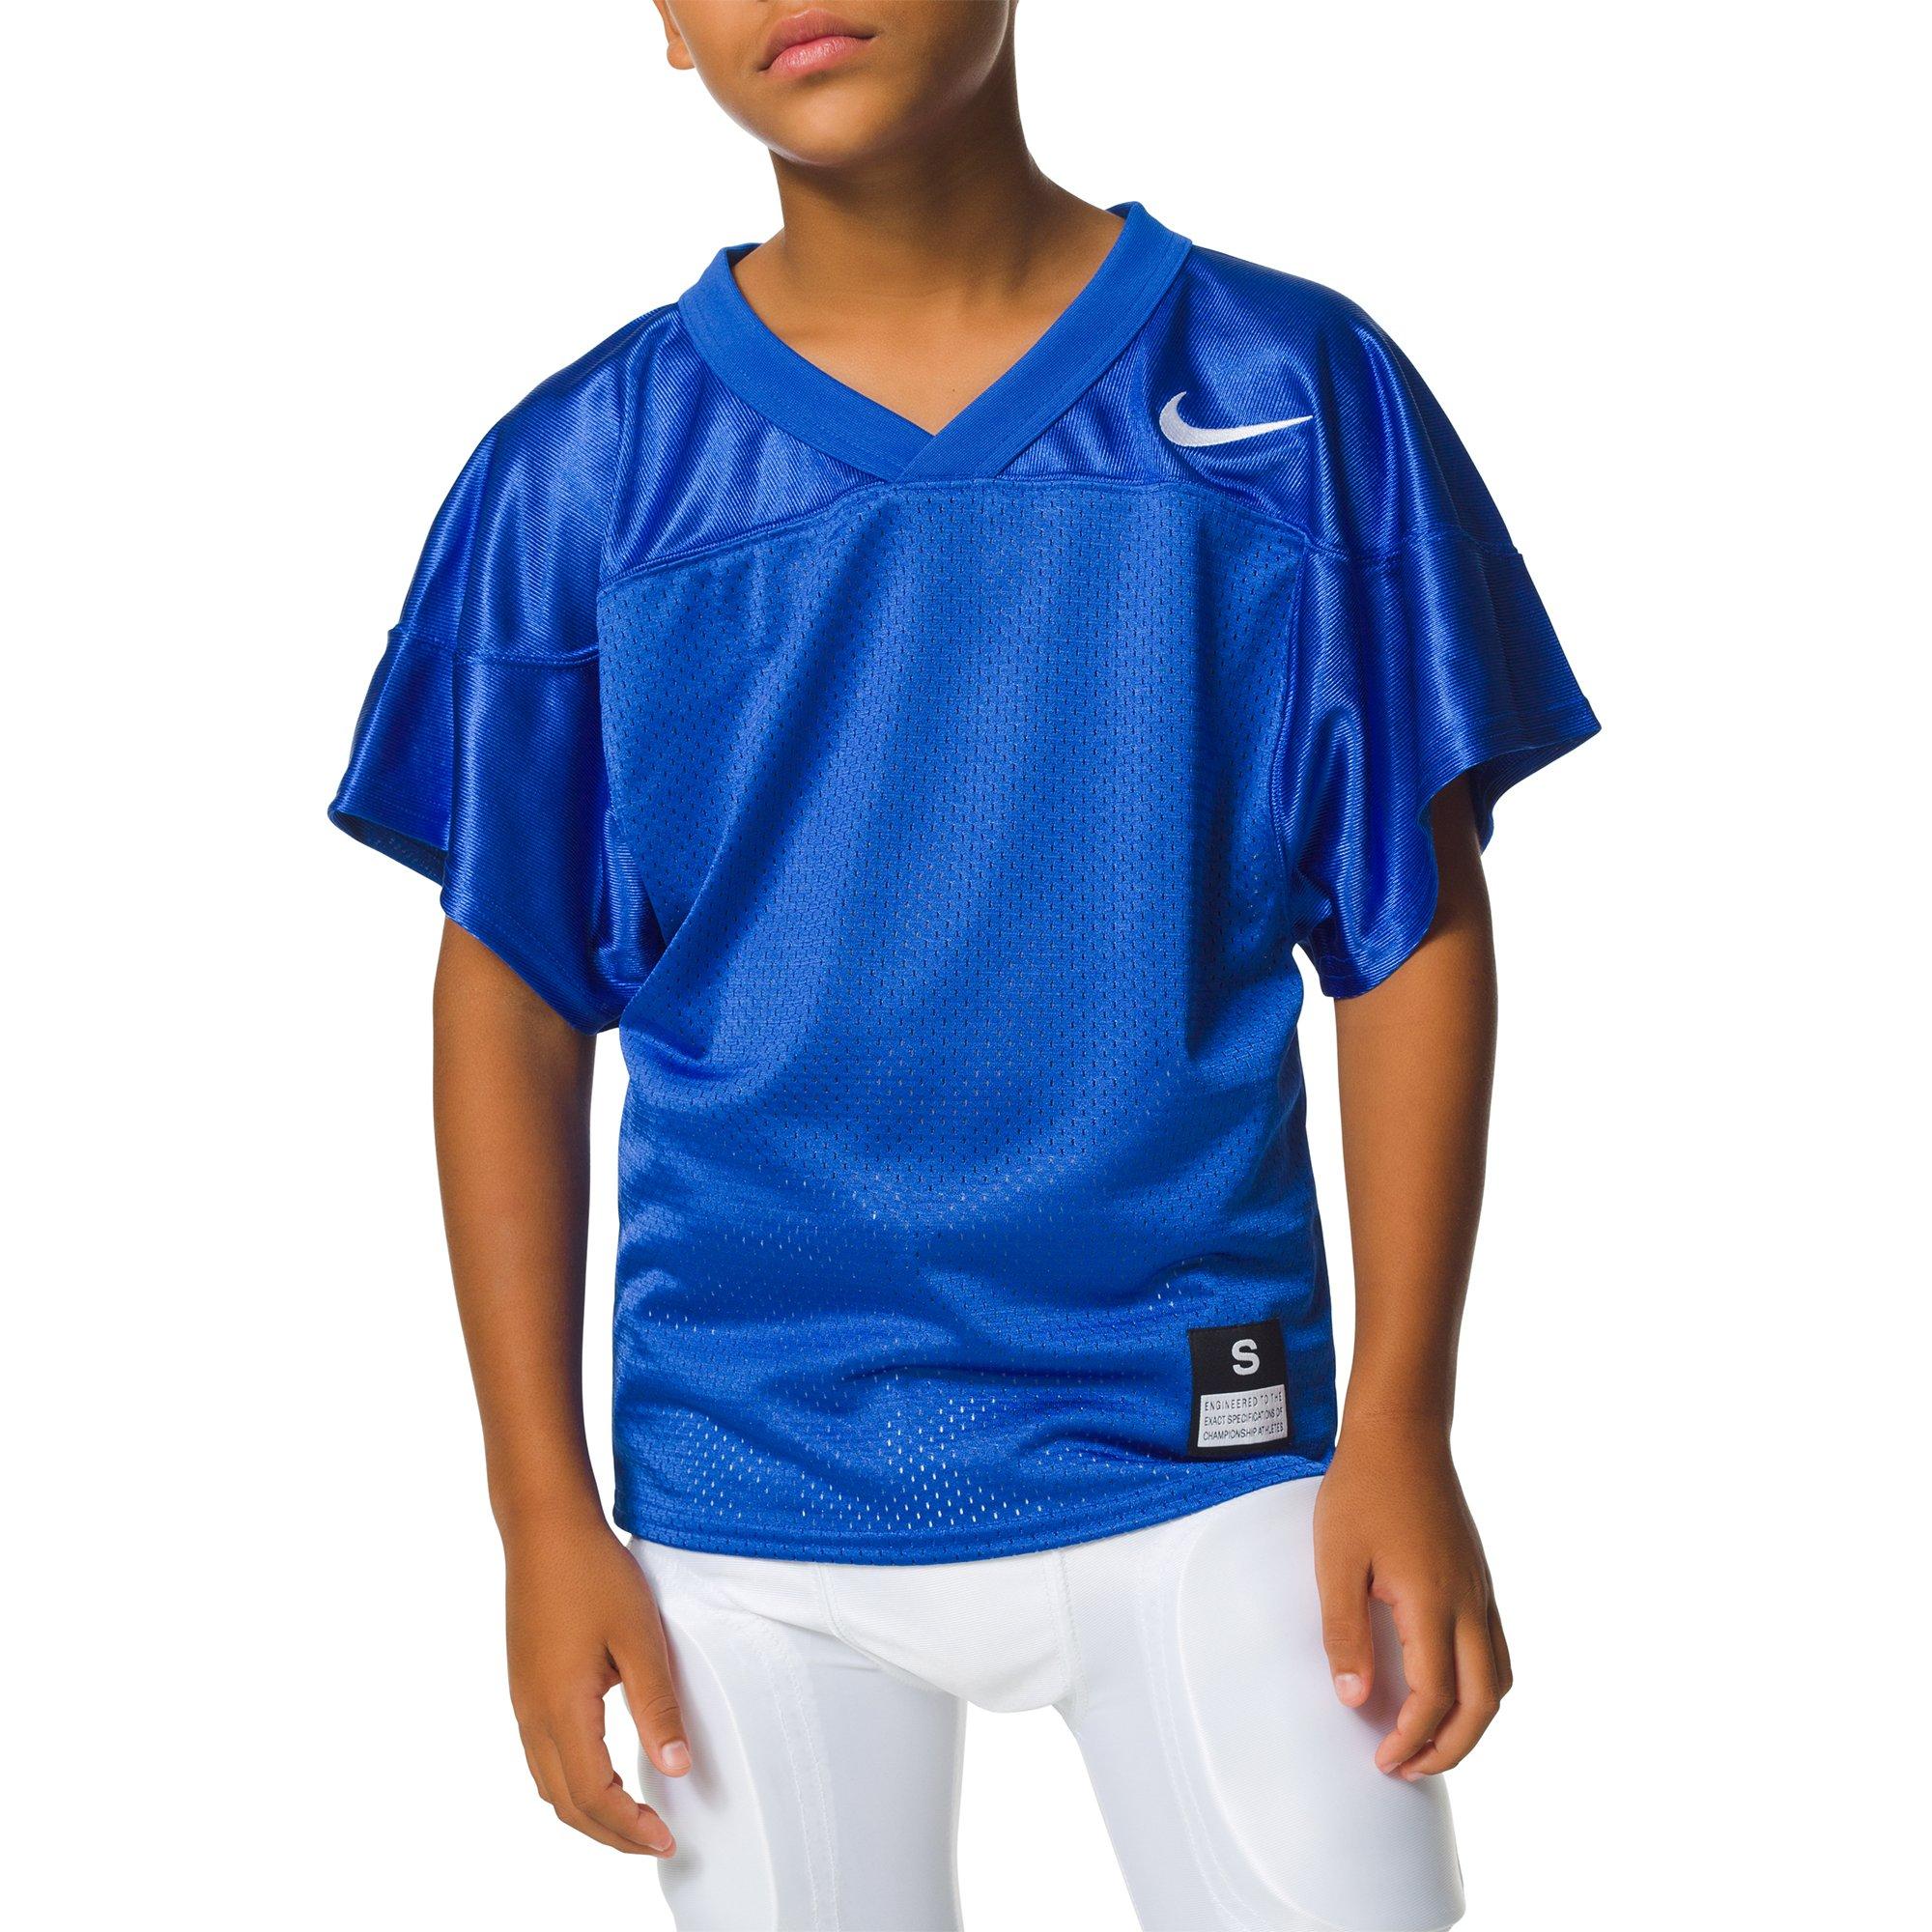 nike youth practice jersey